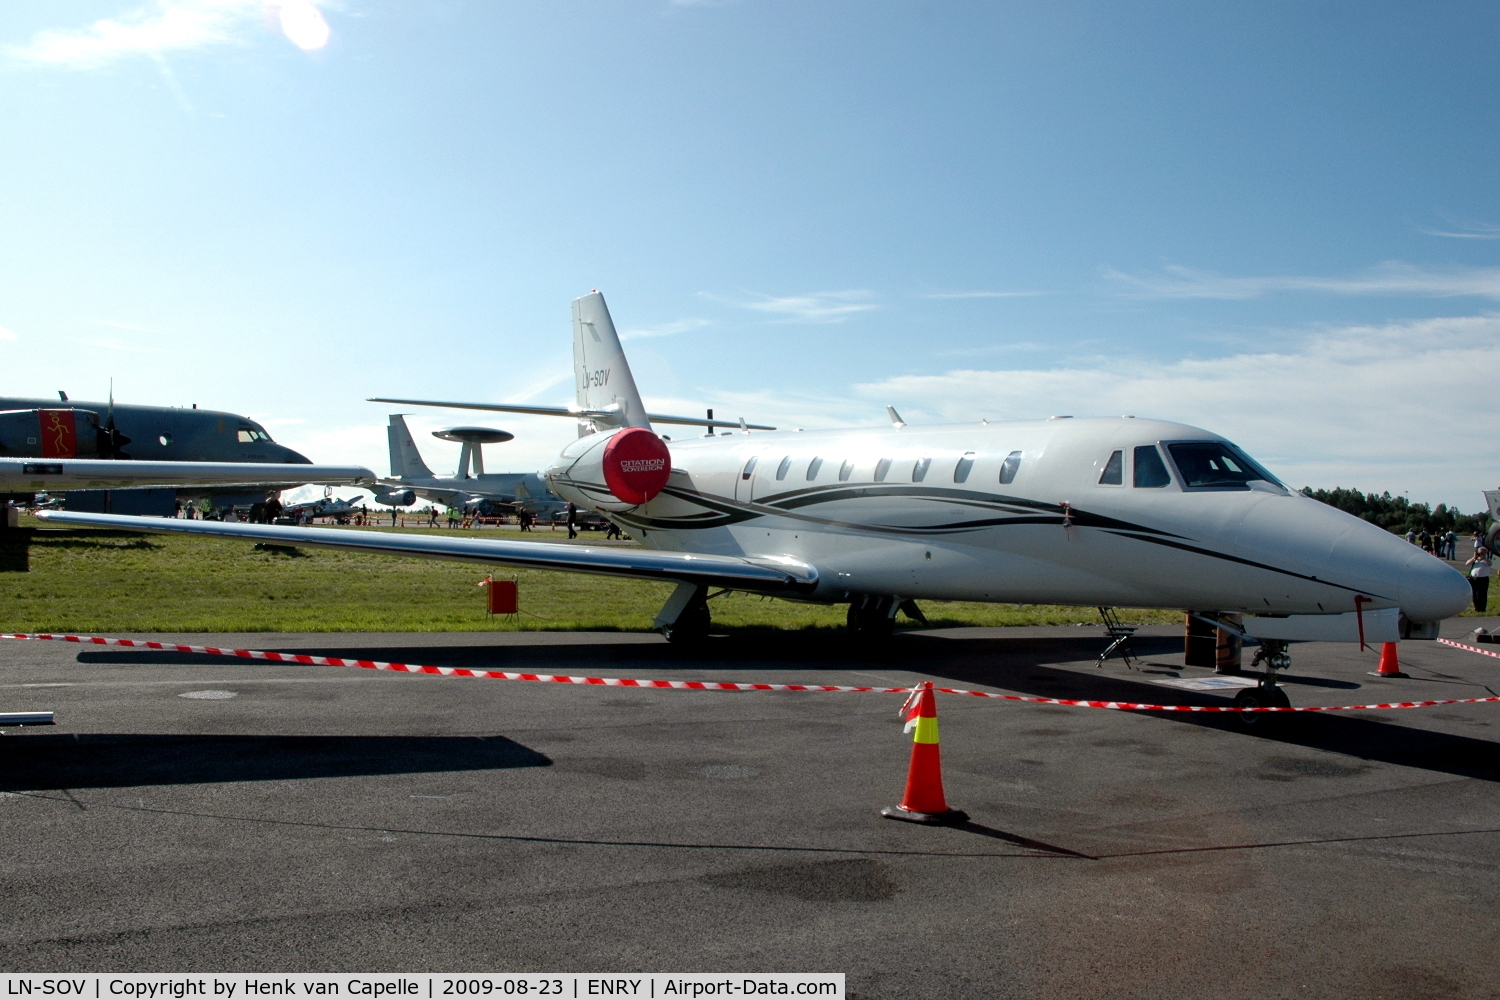 LN-SOV, 2007 Cessna 680 Citation Sovereign C/N 680-0183, Citation Sovereign operated by Sundt Air at Rygge air force base in Norway.